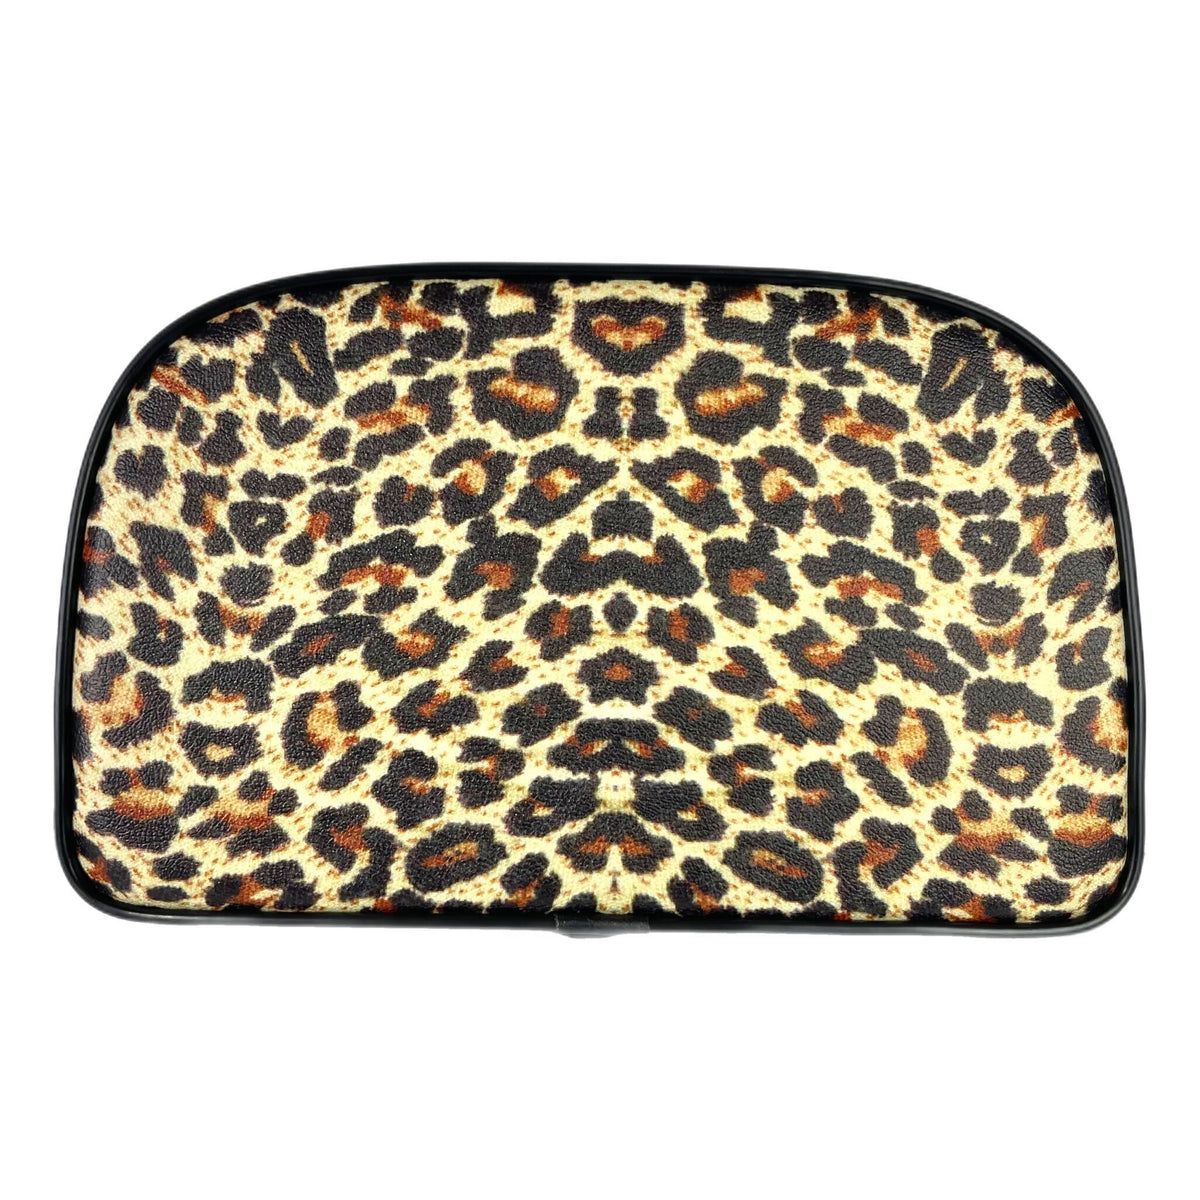 Vespa Lambretta Replacement Backrest Pad For 4 in 1 Stainless Carriers - Leopard Print